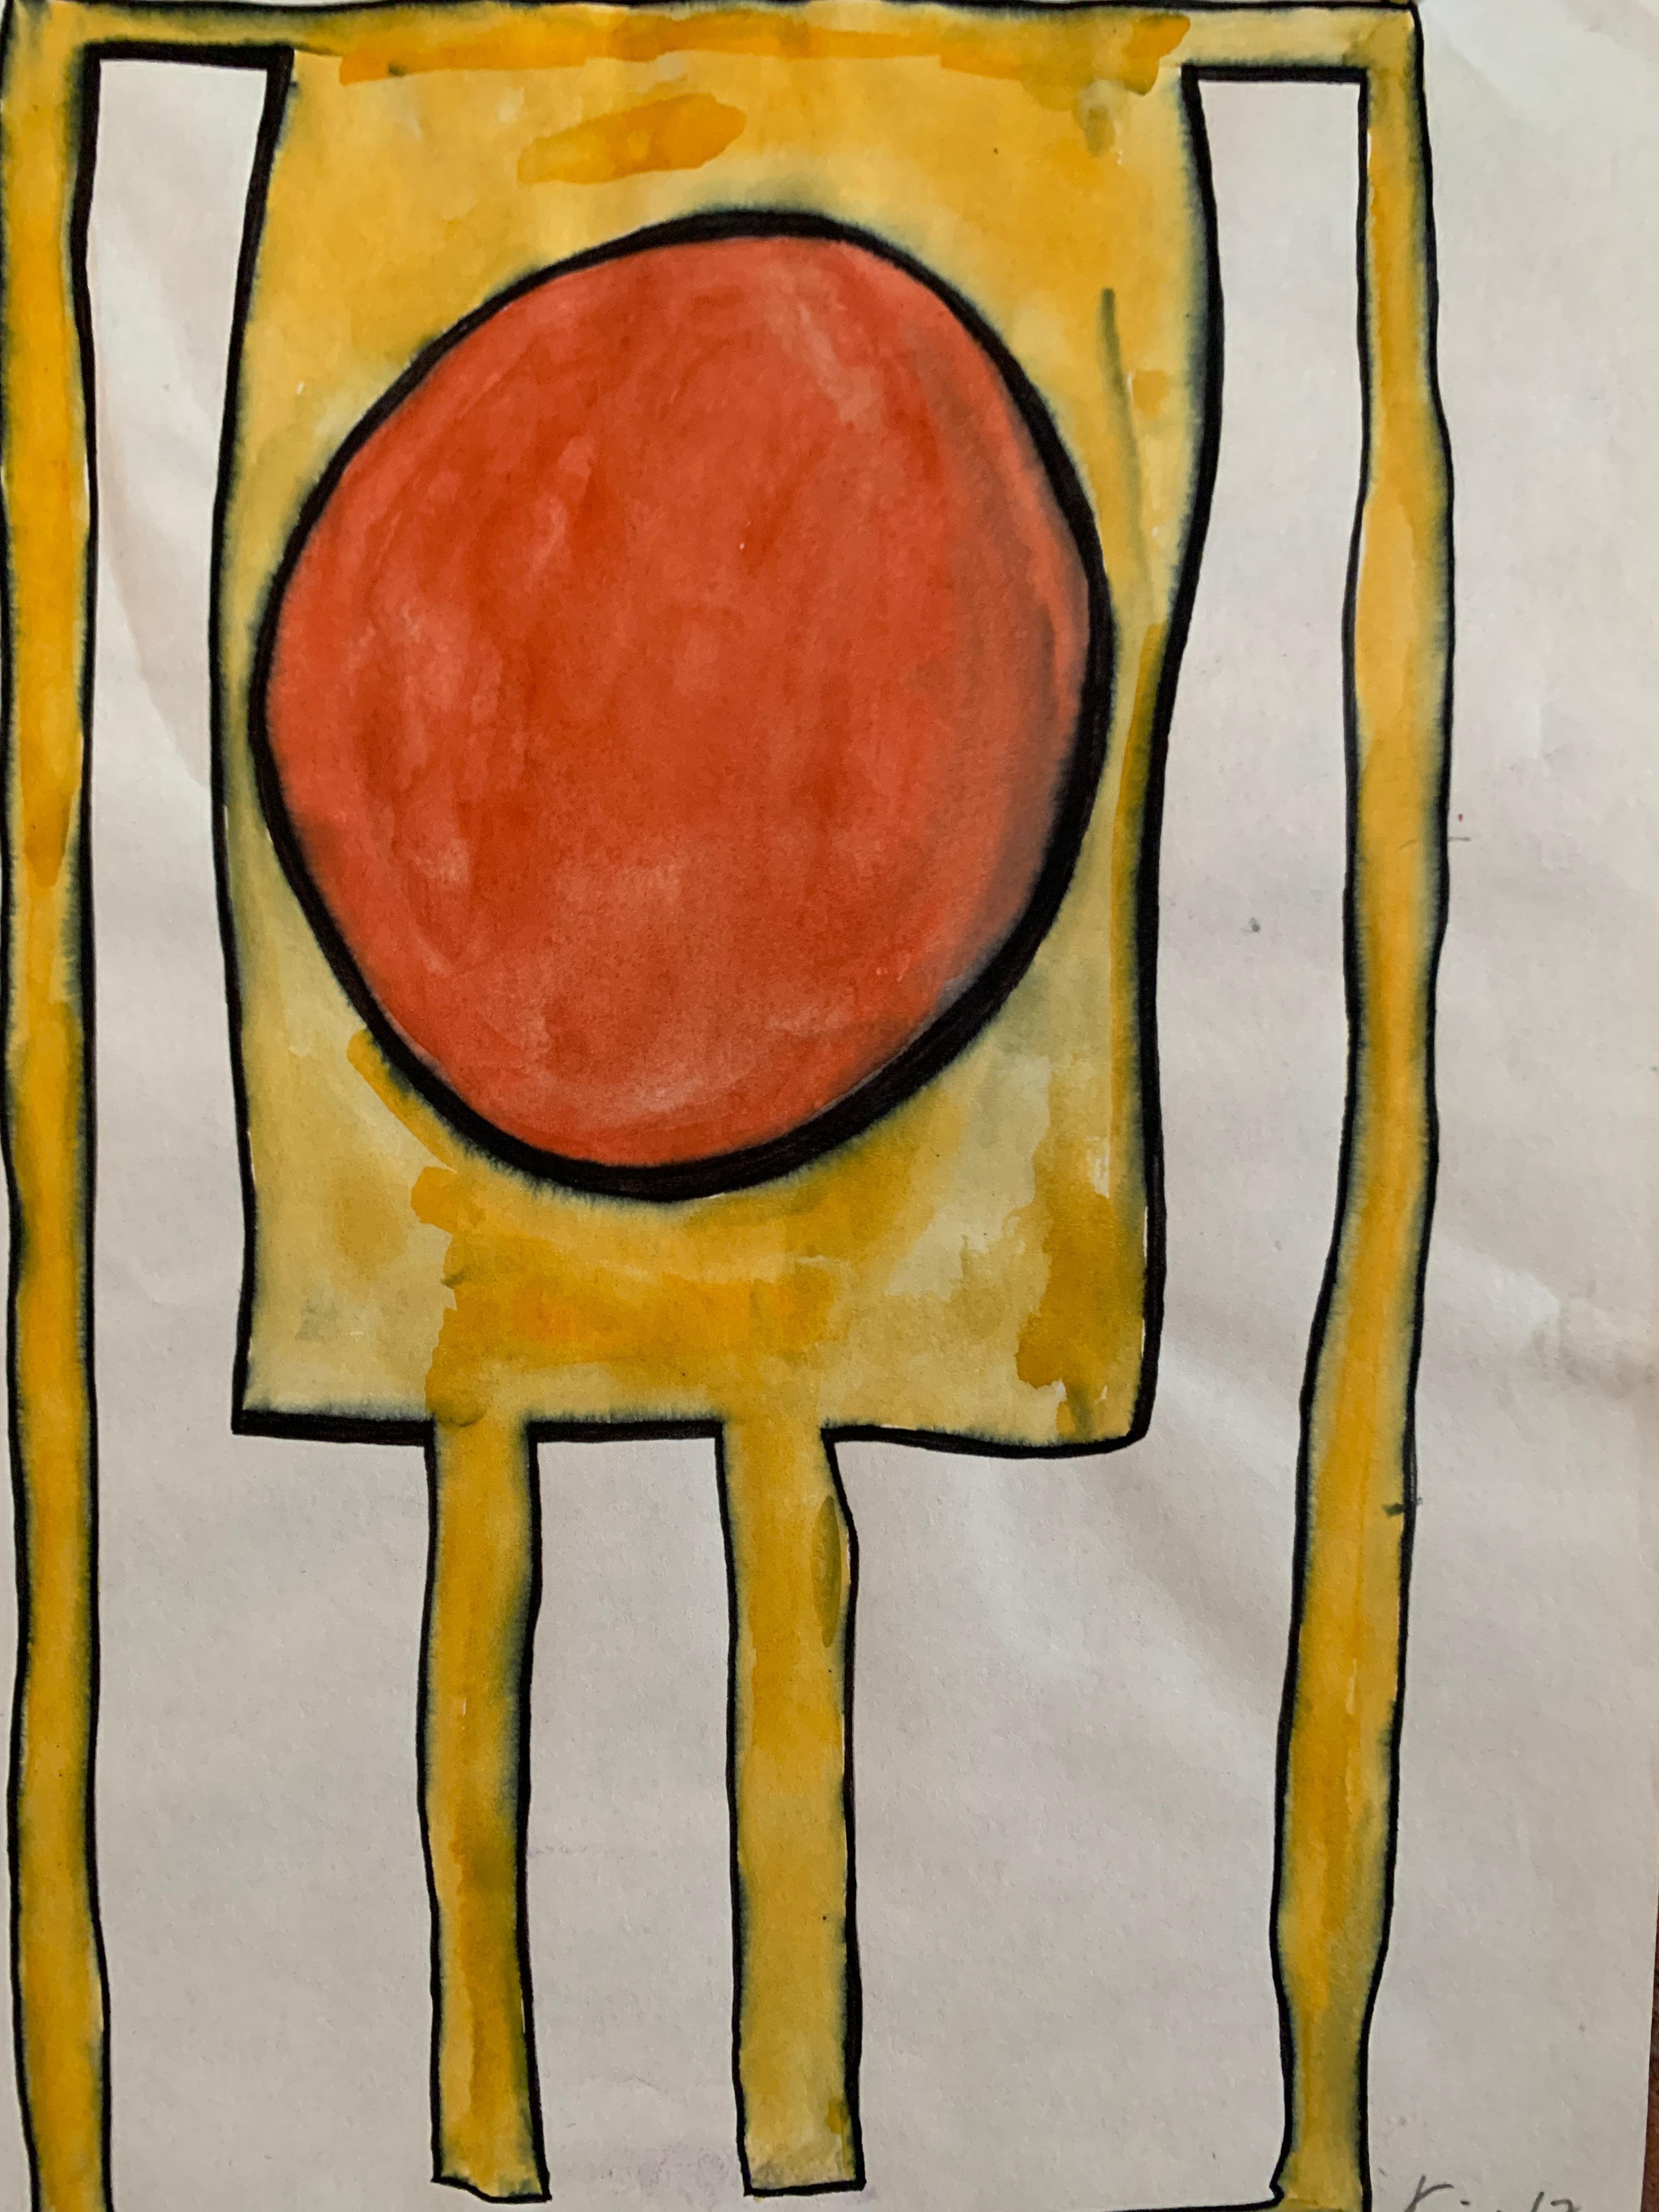 Michael Knigin
Abstract 1 Orange and Yellow
1967
Ink brush and watercolor on paper
8.25